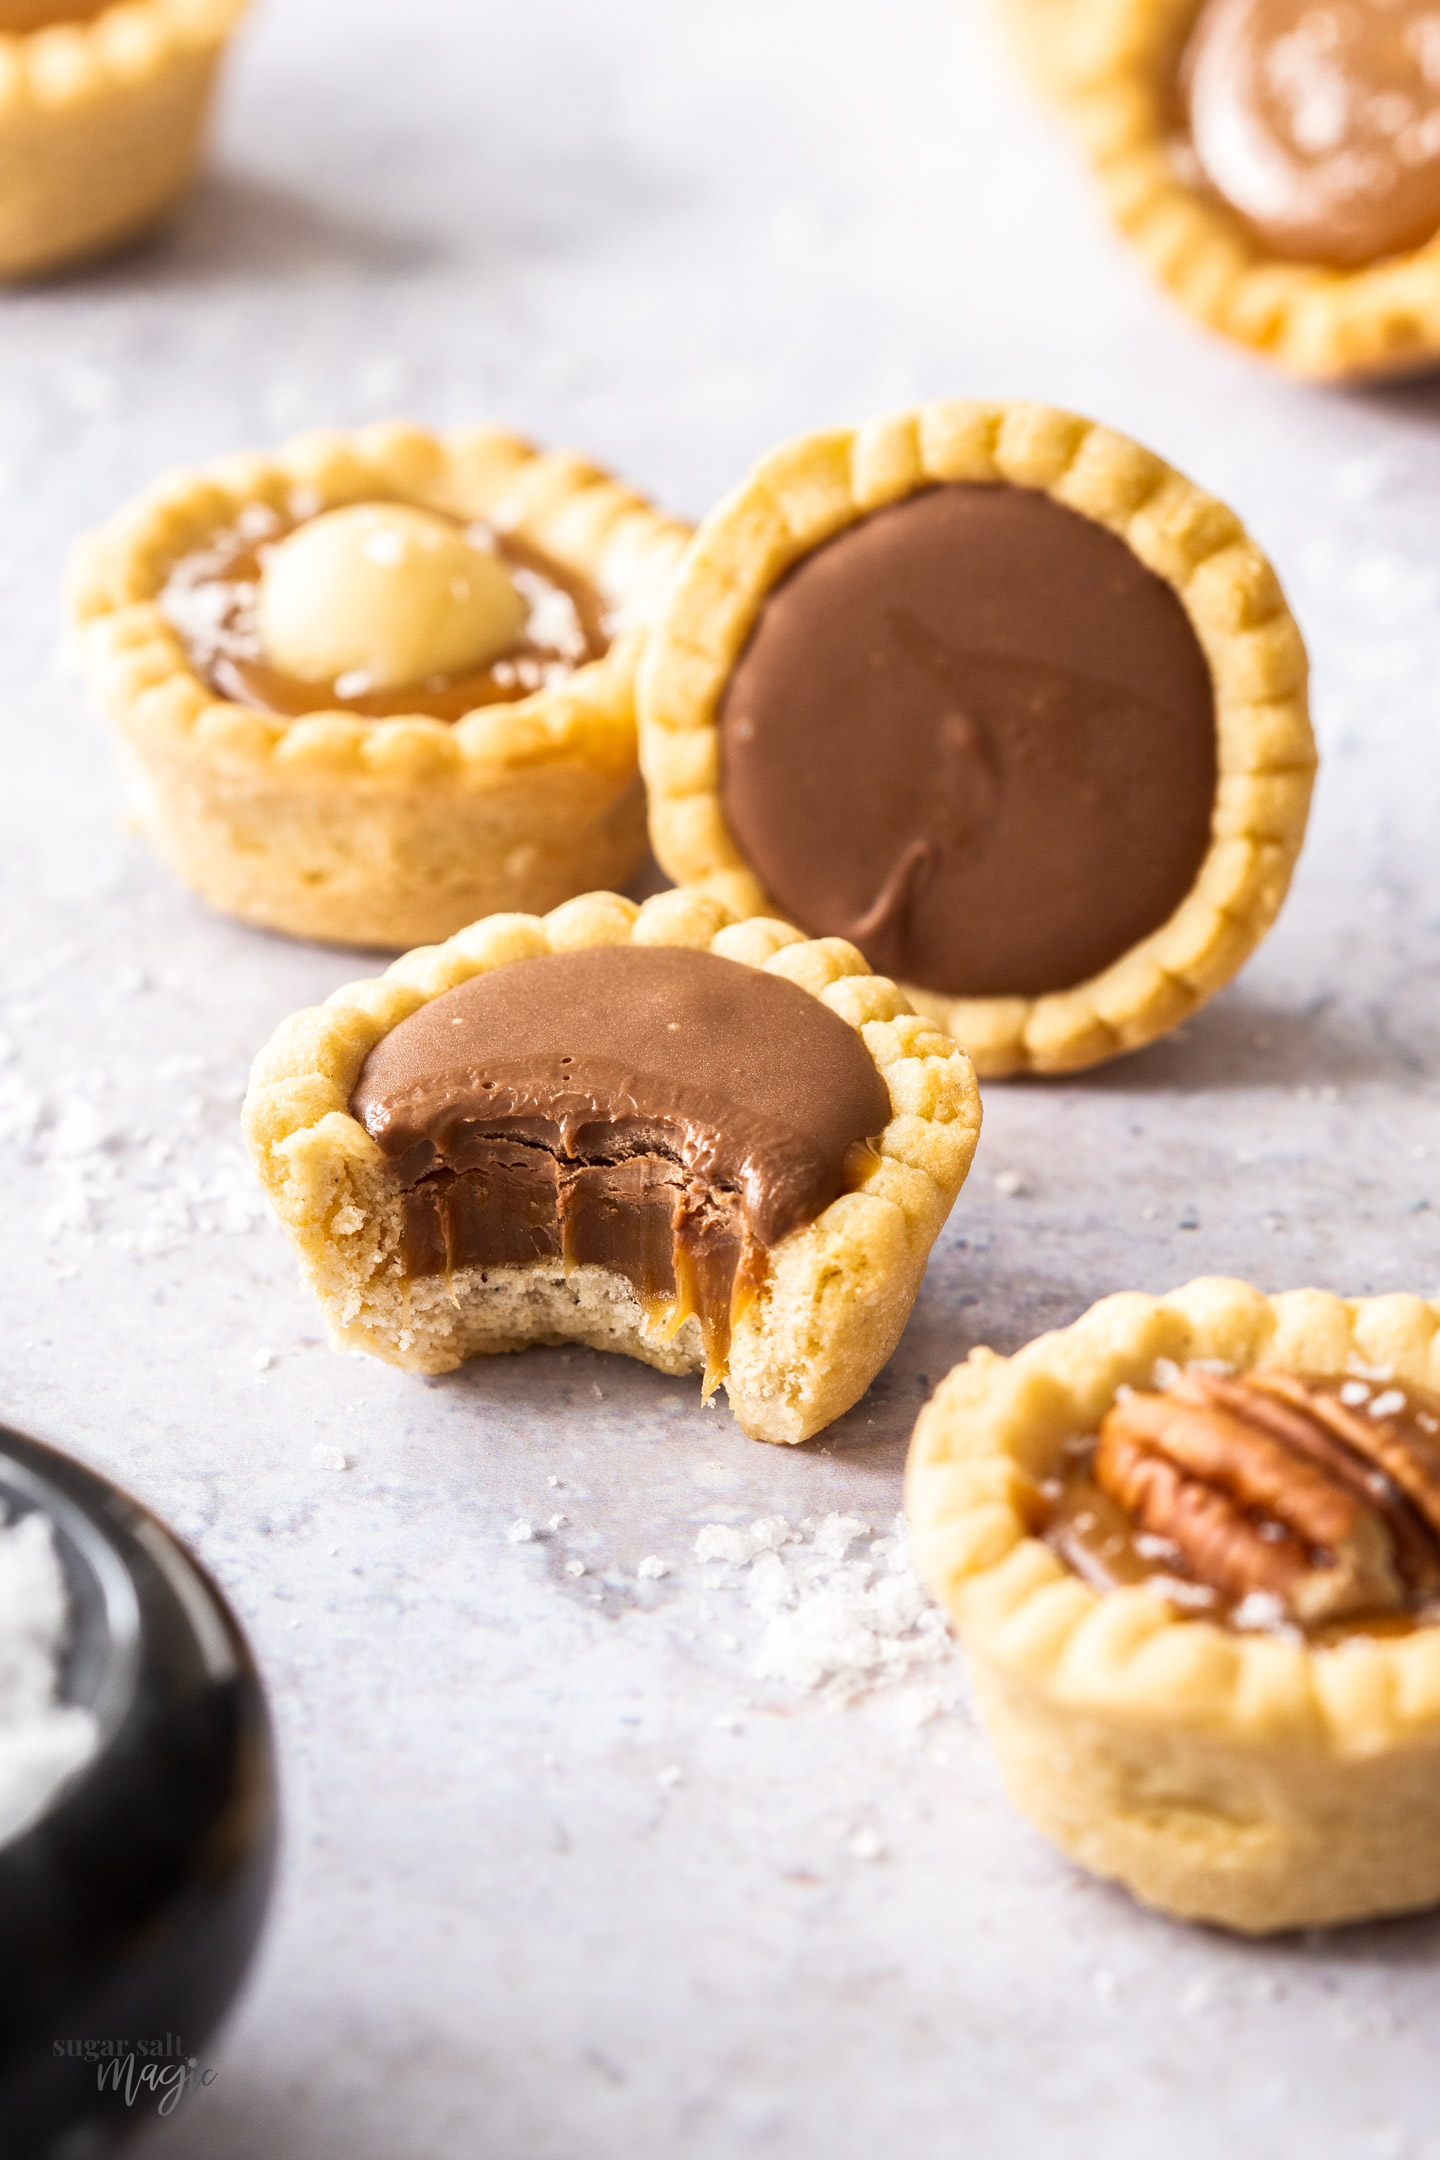 Salted caramel tartlets topped with chocolate and nuts.